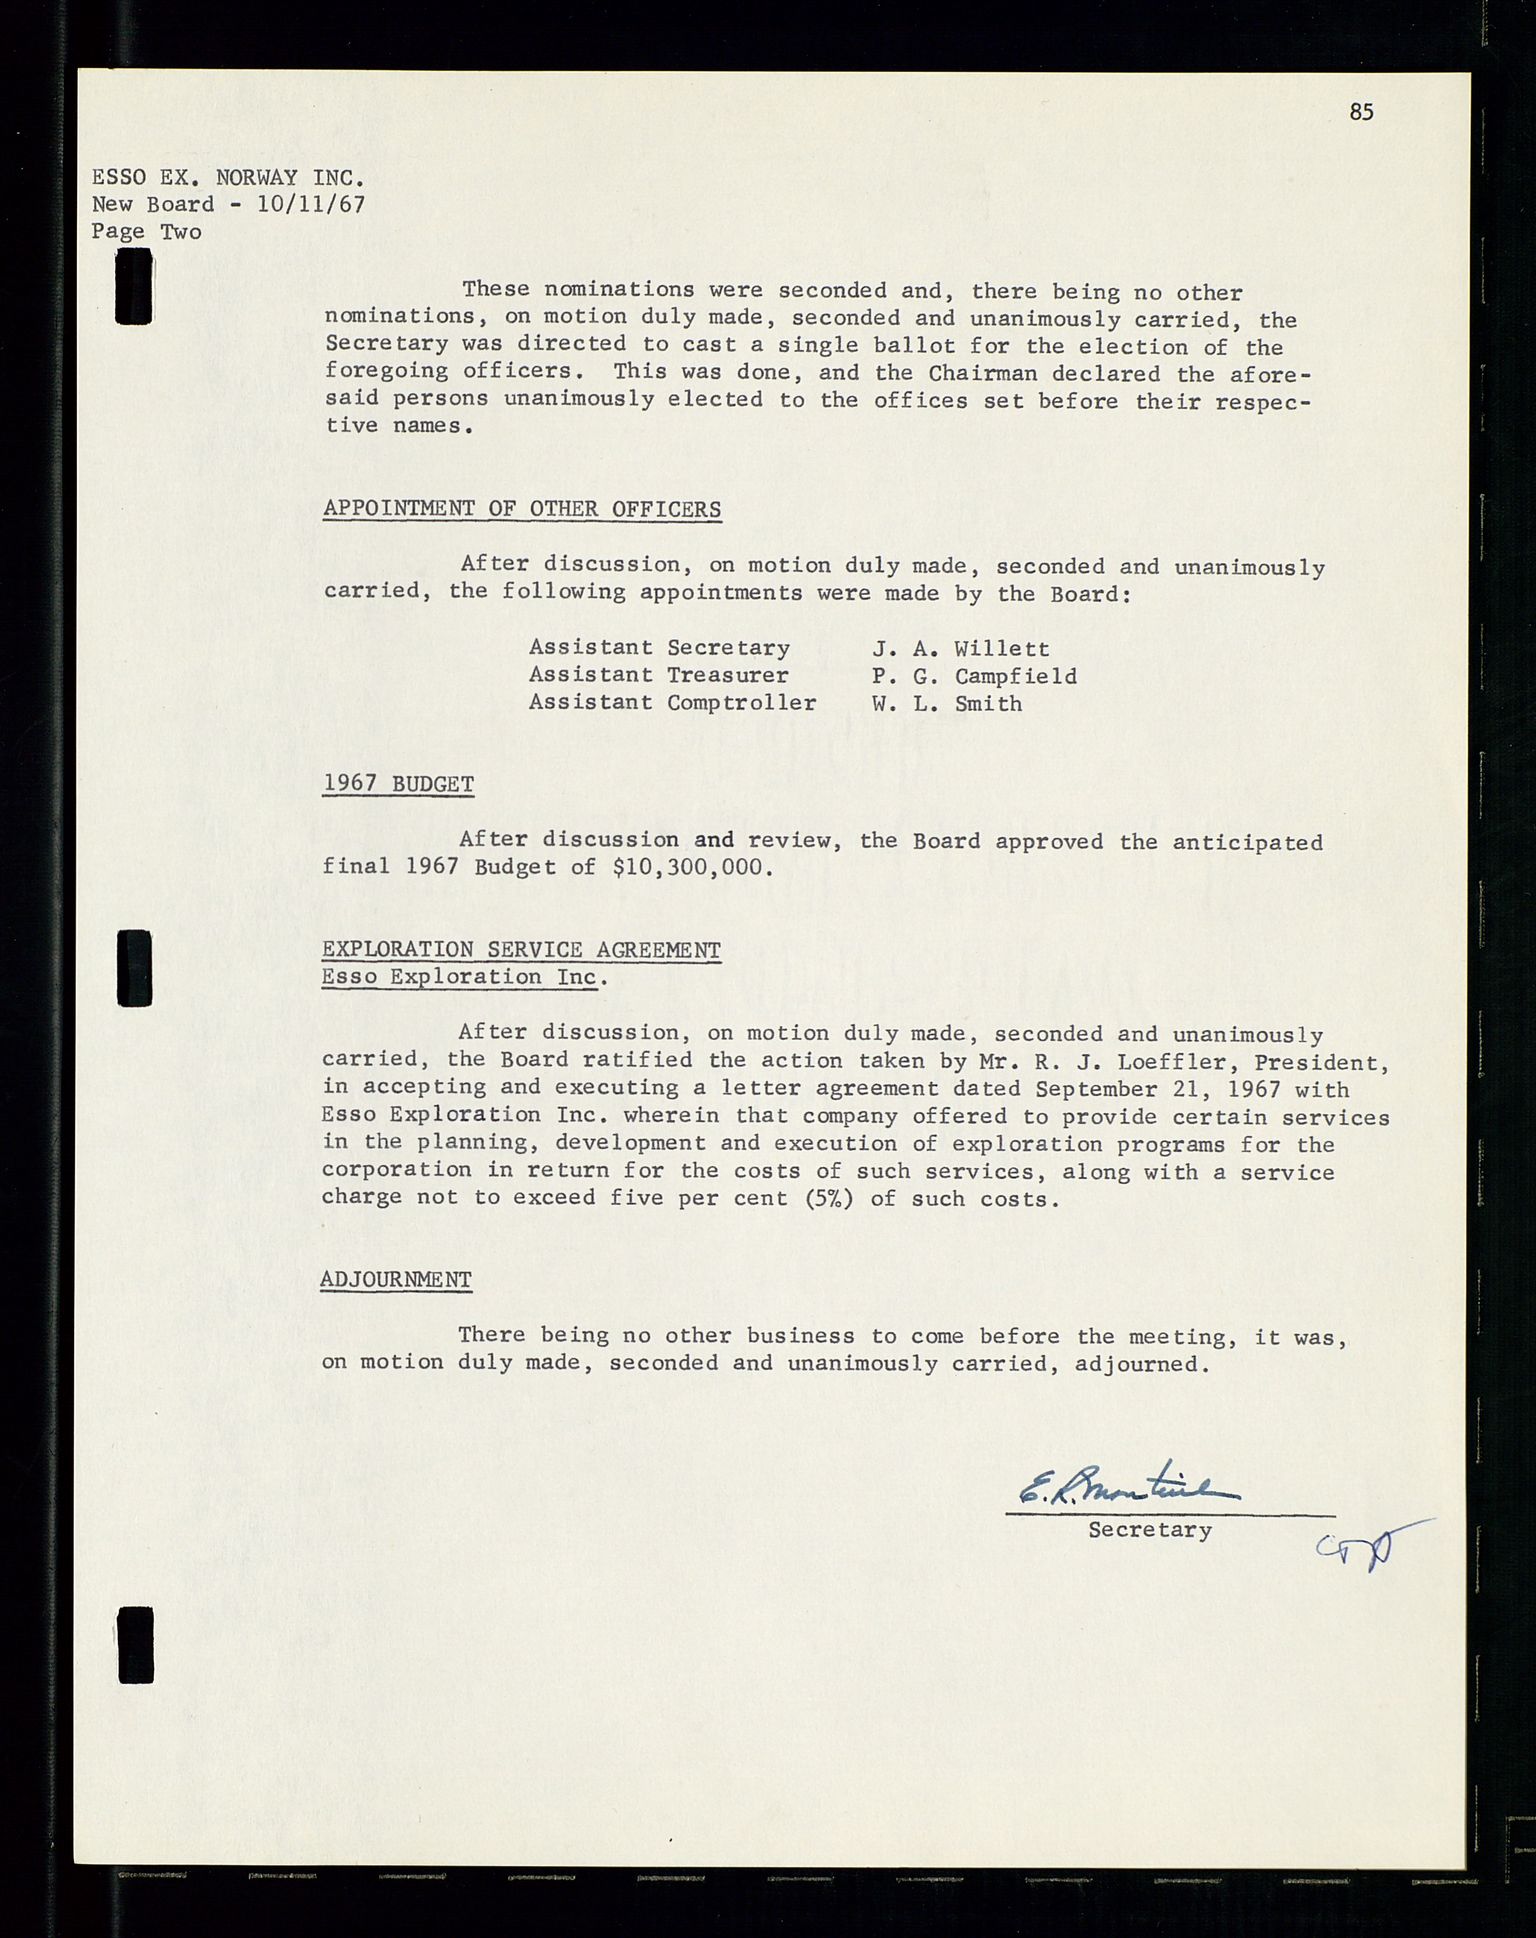 Pa 1512 - Esso Exploration and Production Norway Inc., SAST/A-101917/A/Aa/L0001/0001: Styredokumenter / Corporate records, By-Laws, Board meeting minutes, Incorporations, 1965-1975, s. 85